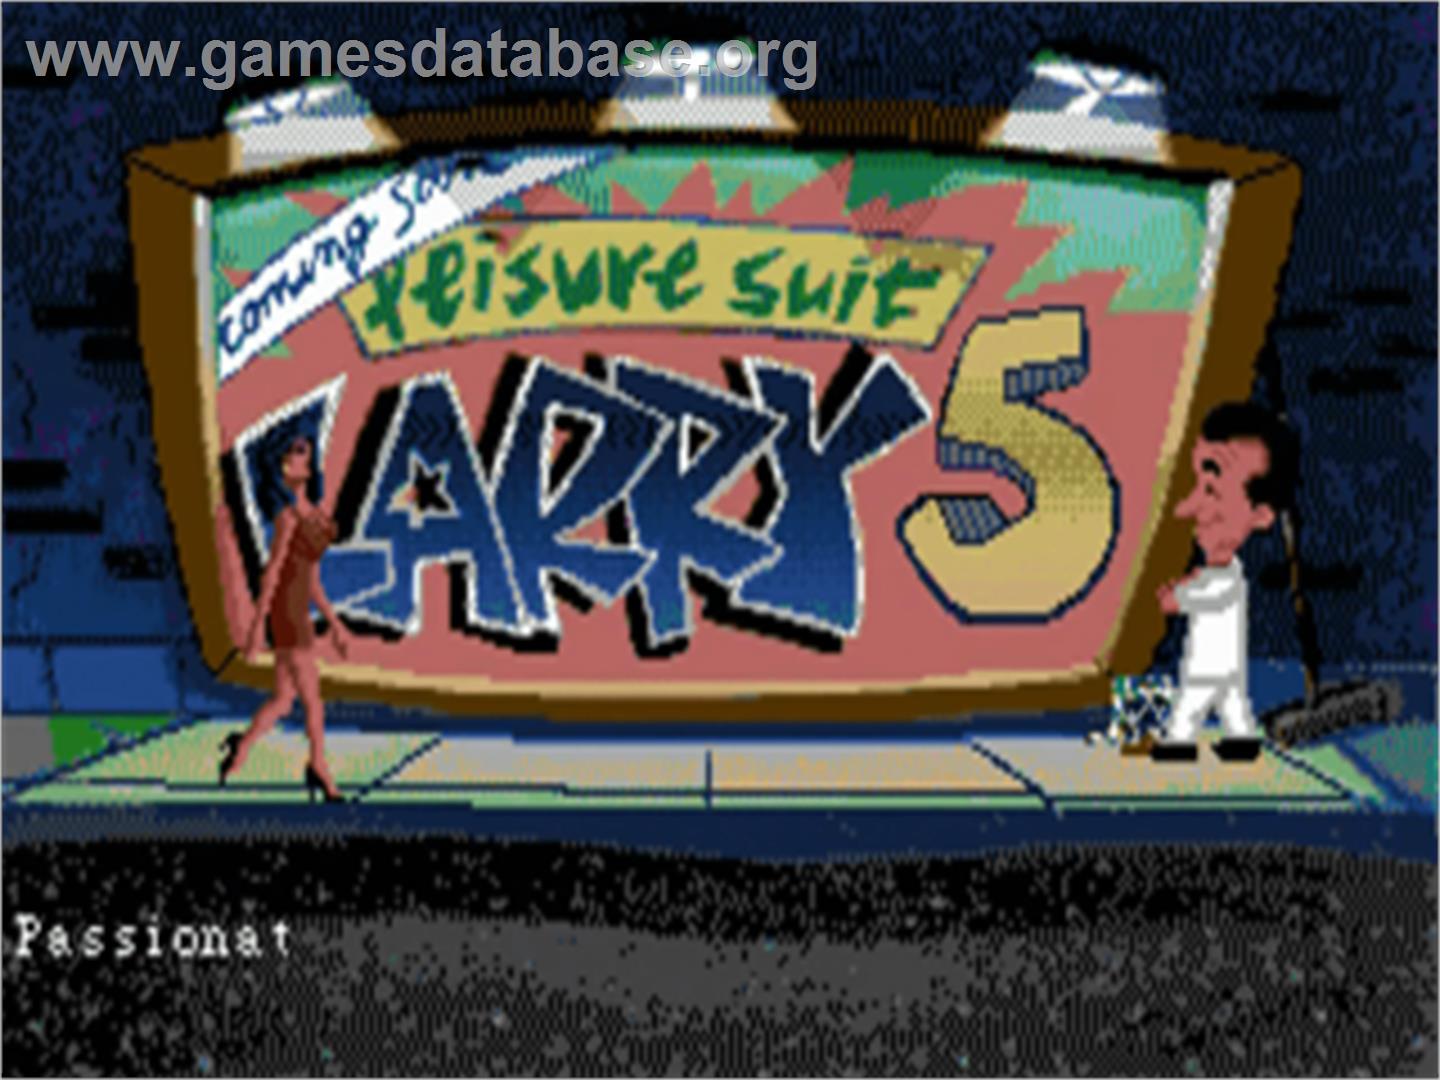 Leisure Suit Larry 5: Passionate Patti Does a Little Undercover Work - Commodore Amiga - Artwork - Title Screen